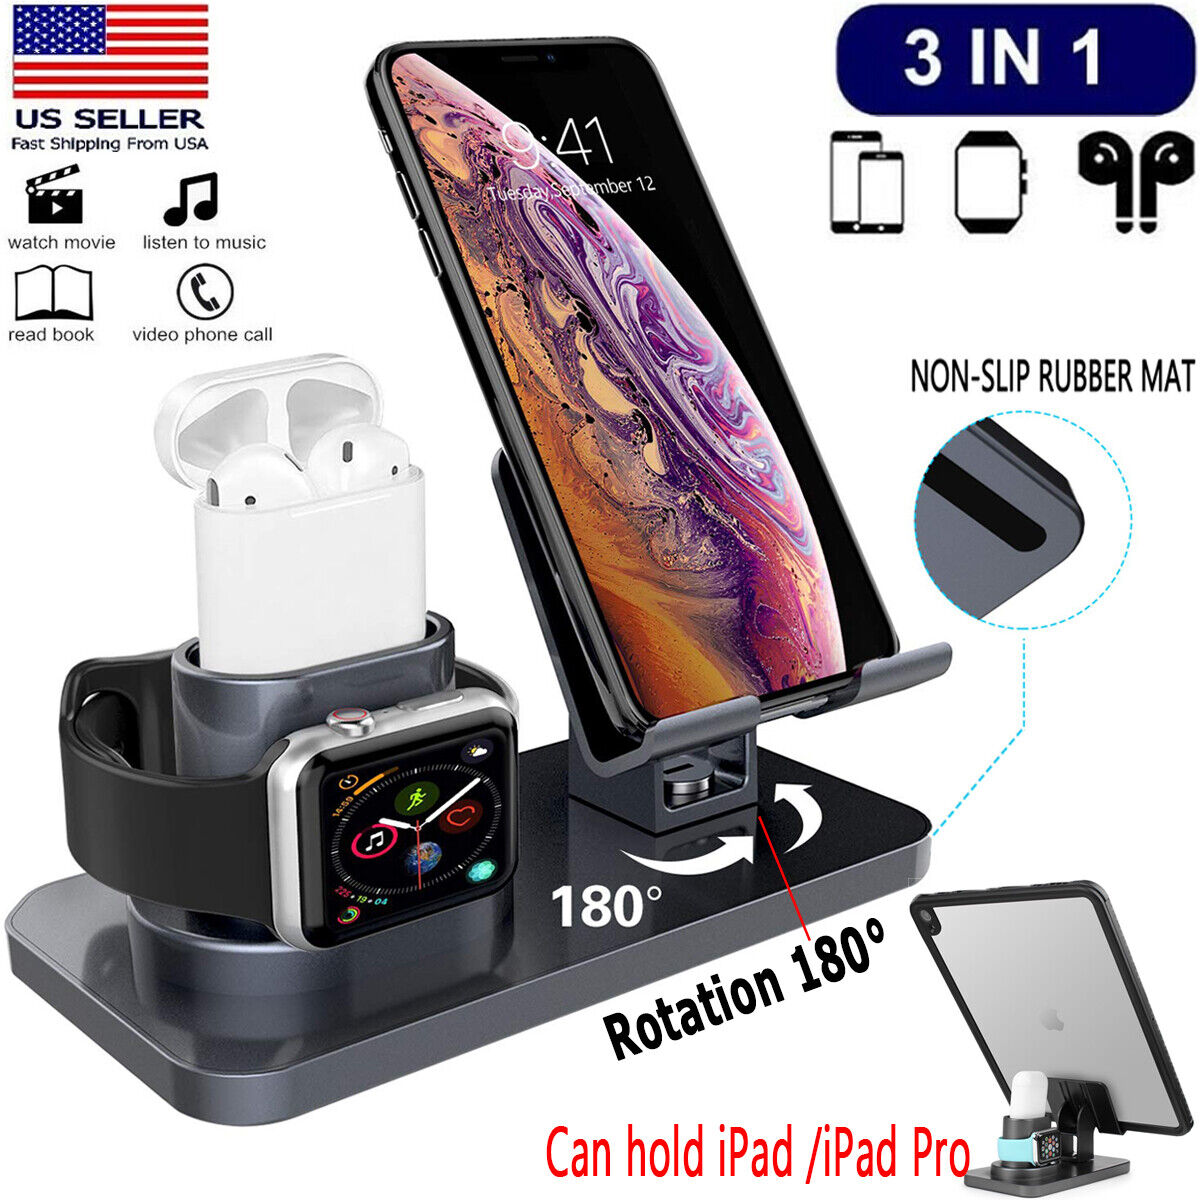 3 in 1 Charging Dock Station Holder Stand For Apple Watch AirPods/iPhone 11/iPad Number of Ports 3 Design/Finish 3 in 1